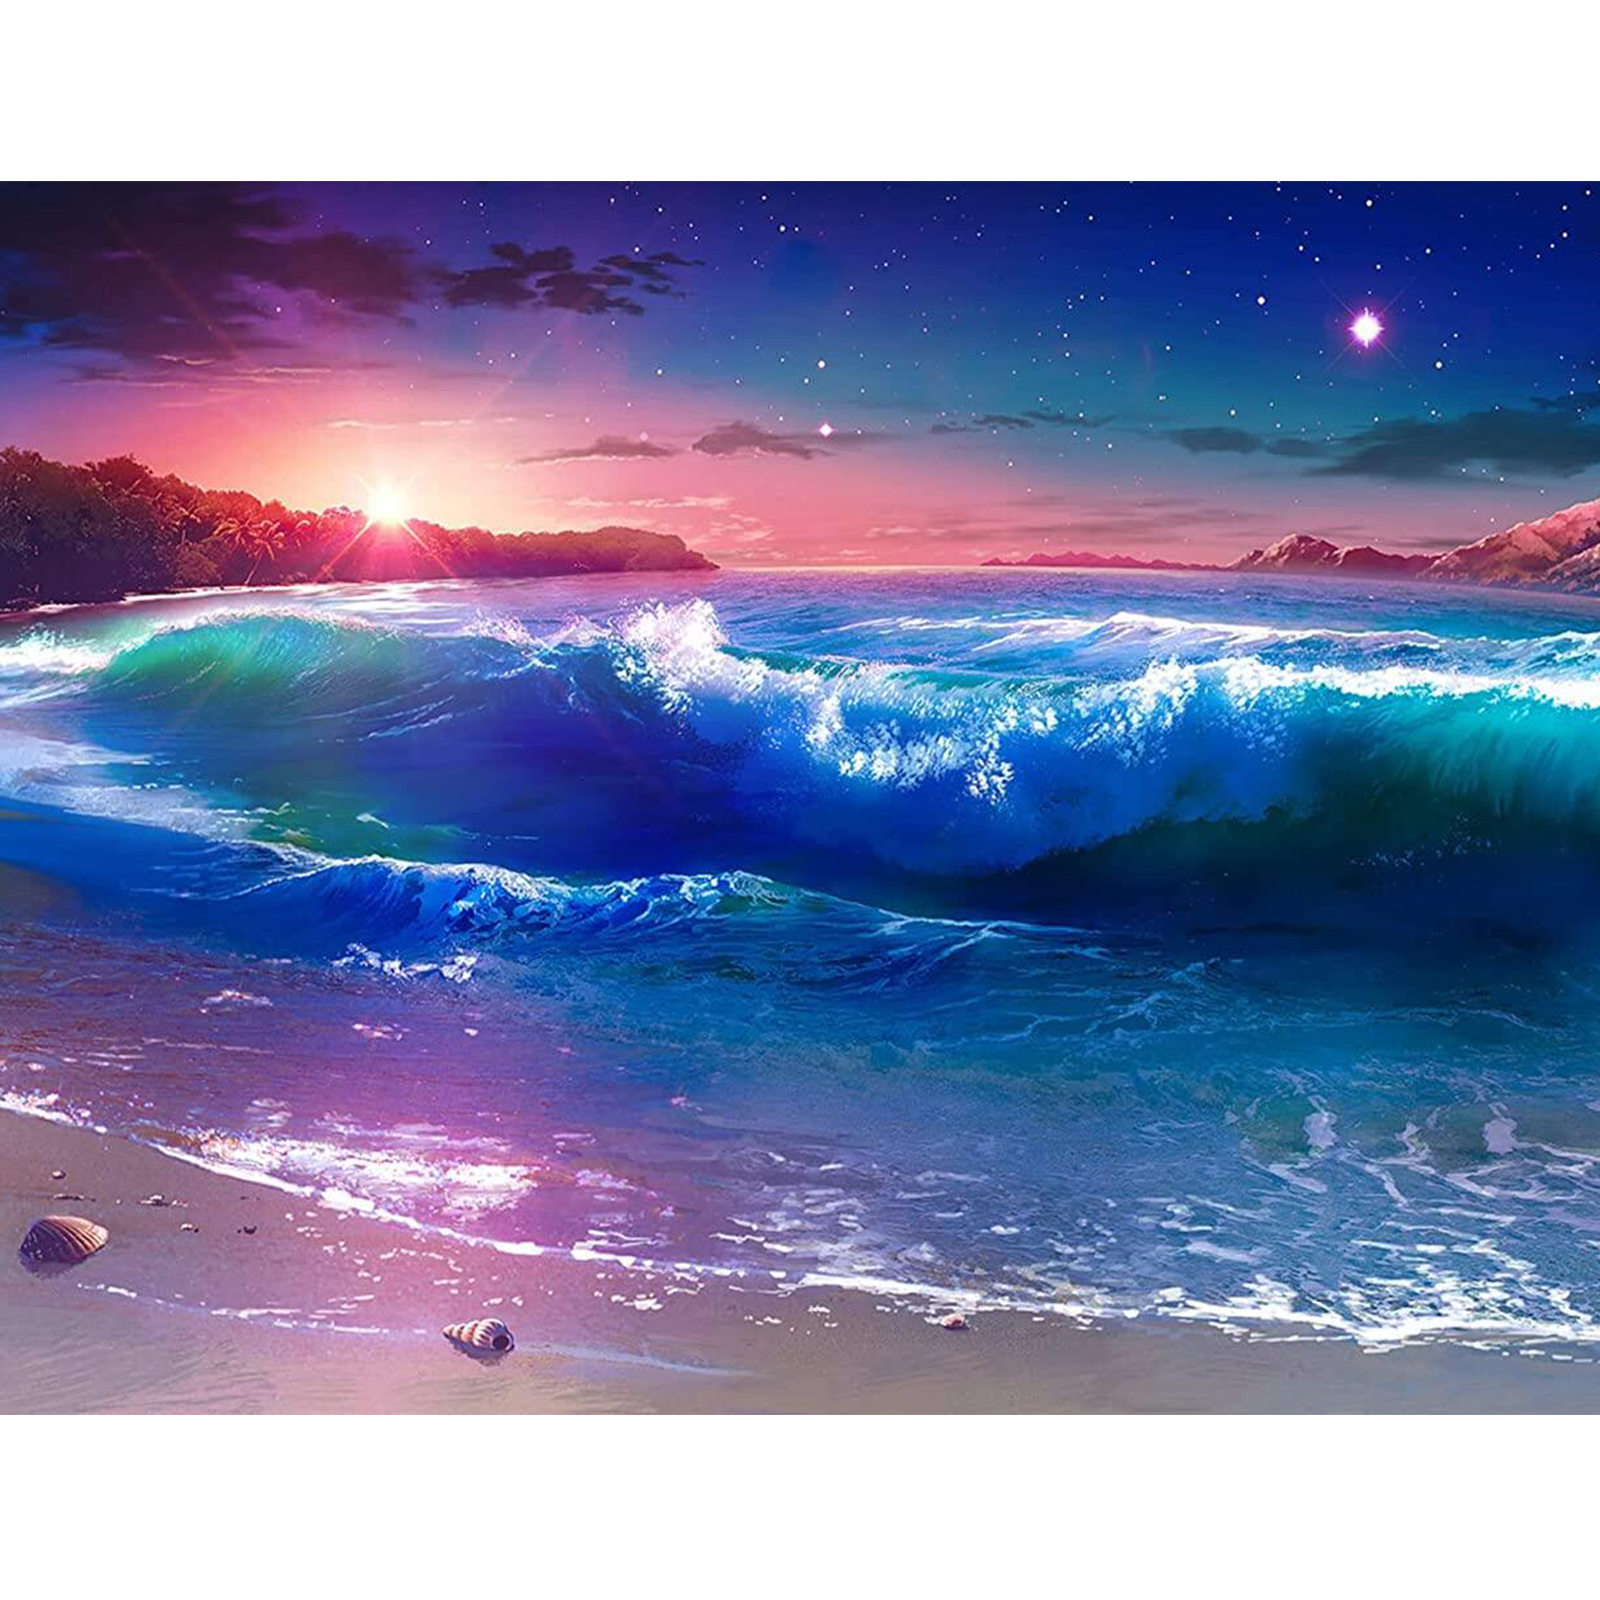 The Great Wave Diamond Painting Kits for Adults-Ocean Diamond Art Kits for  Adults,Landscape Gem Art Kits for Adults for Gift Home Wall